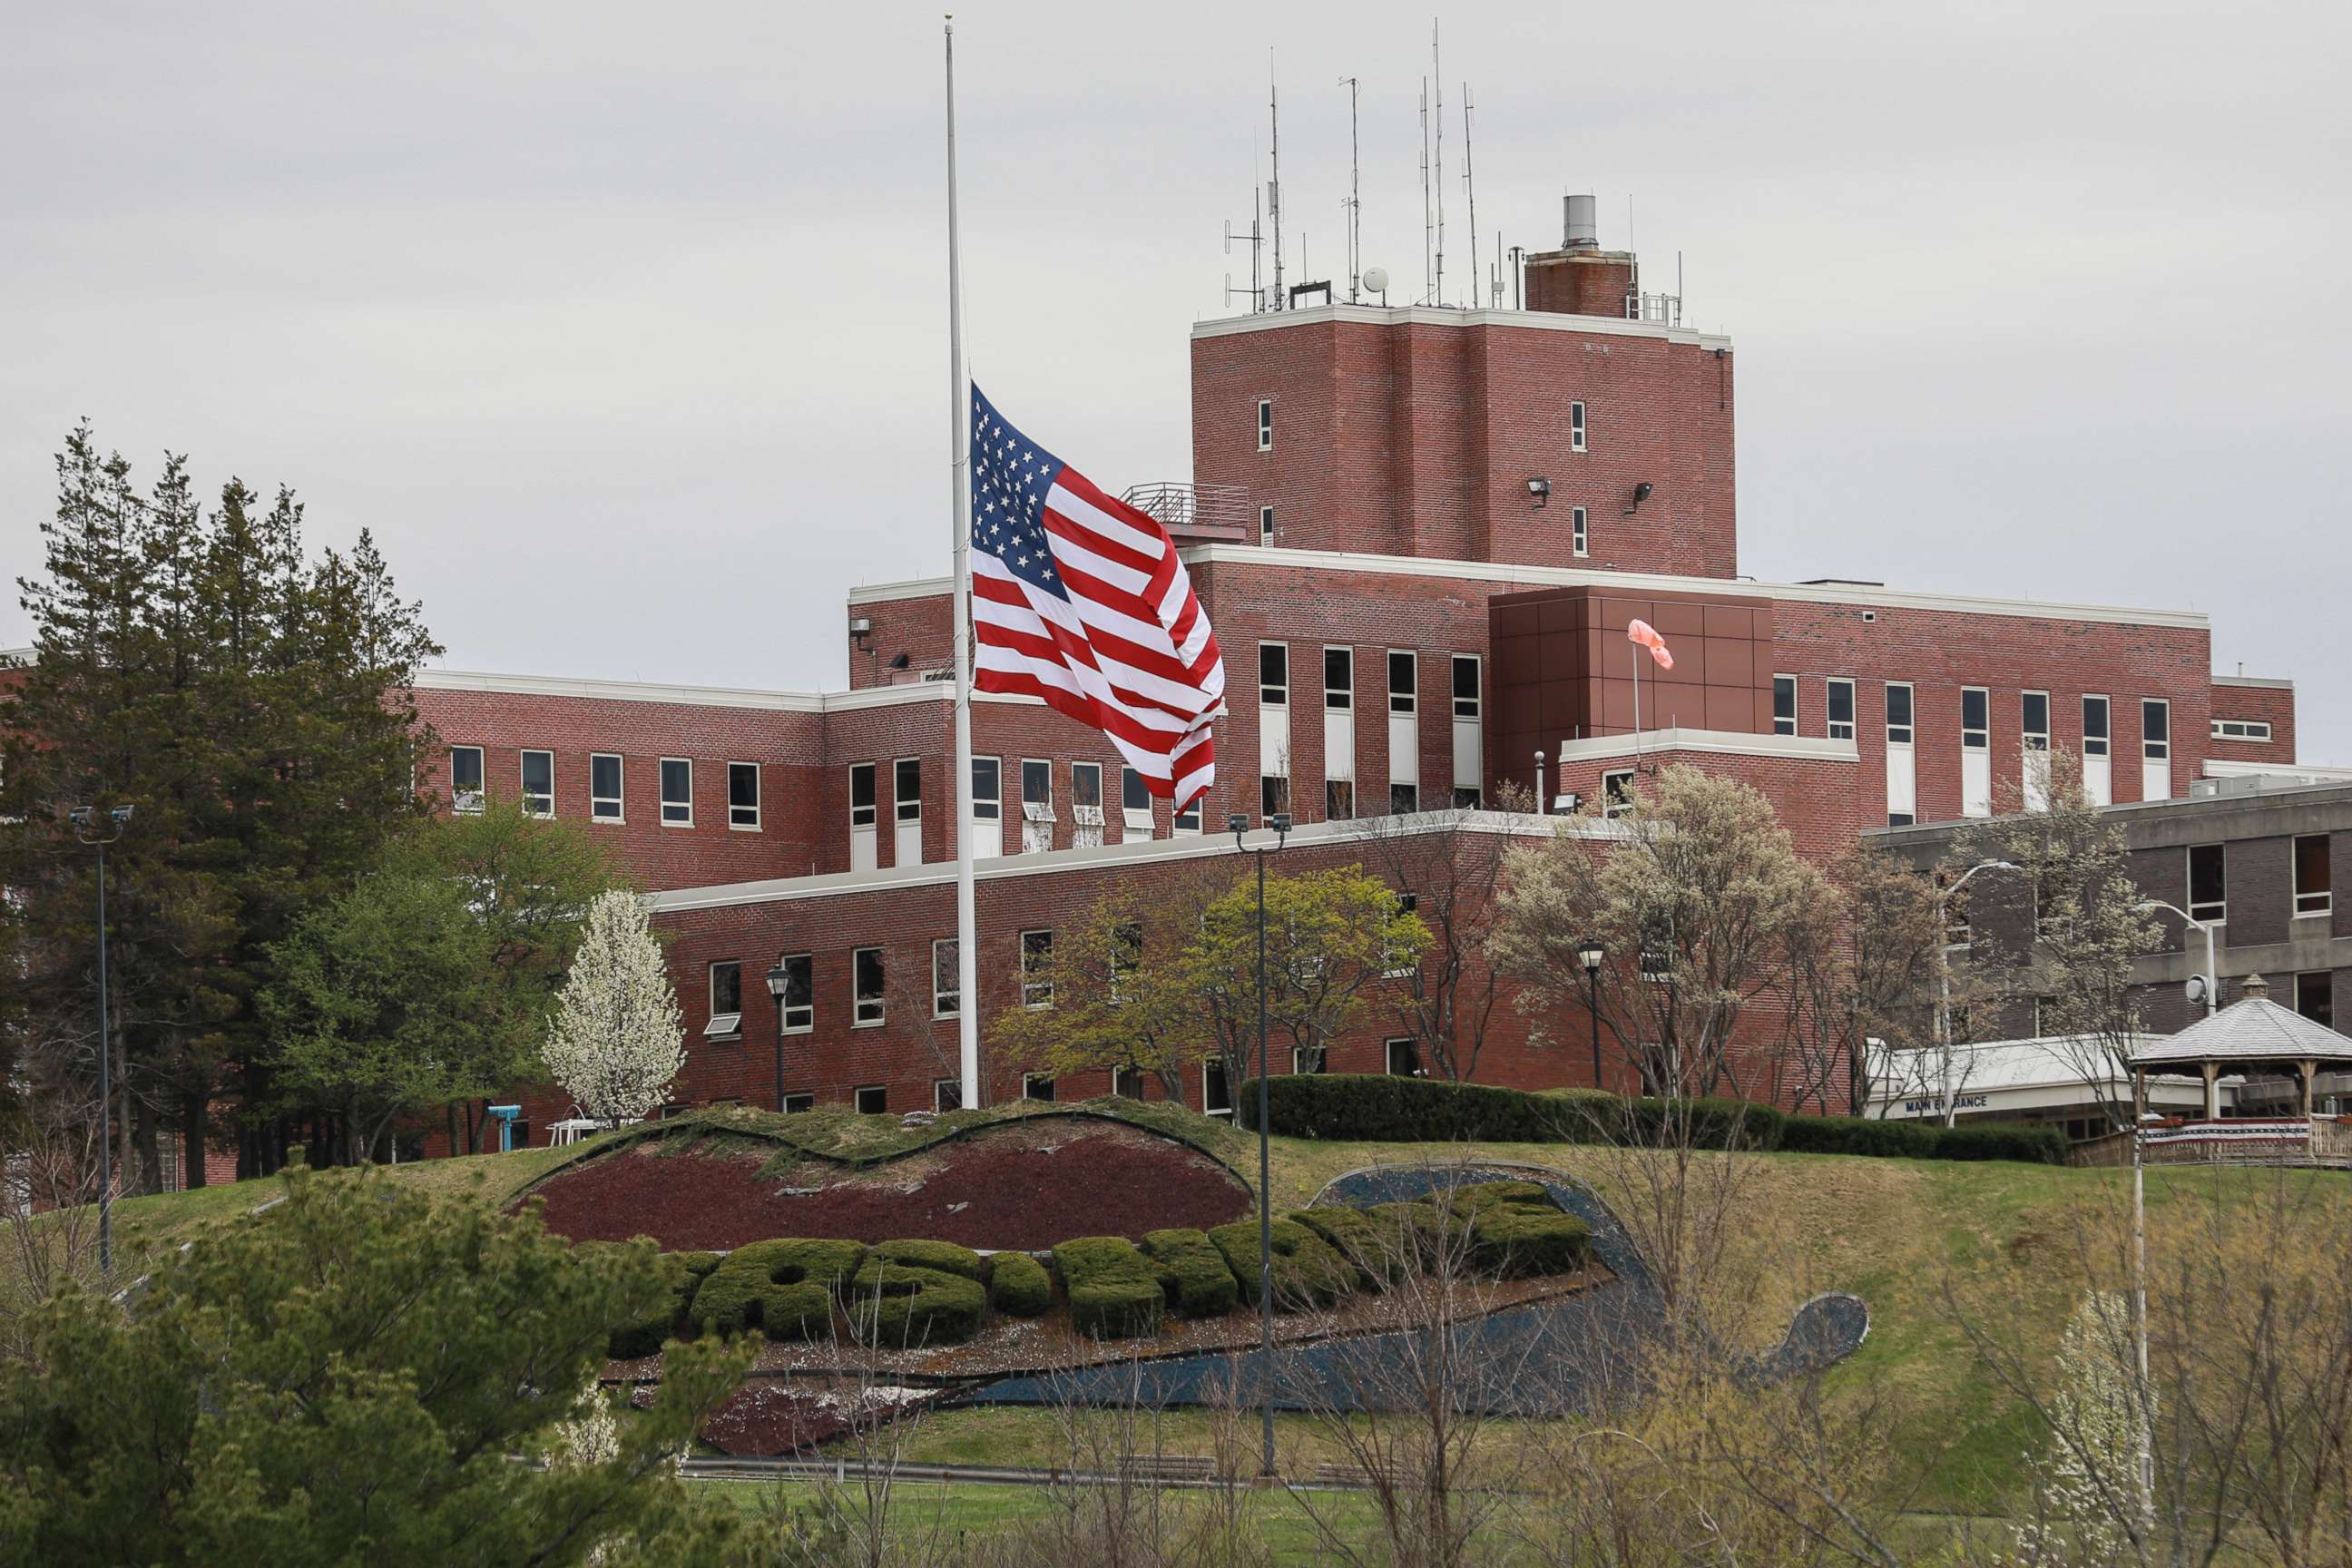 PHOTO: An American flag flies at half-mast outside the Holyoke Soldiers' Home on April 29, 2020 in Holyoke, Mass.